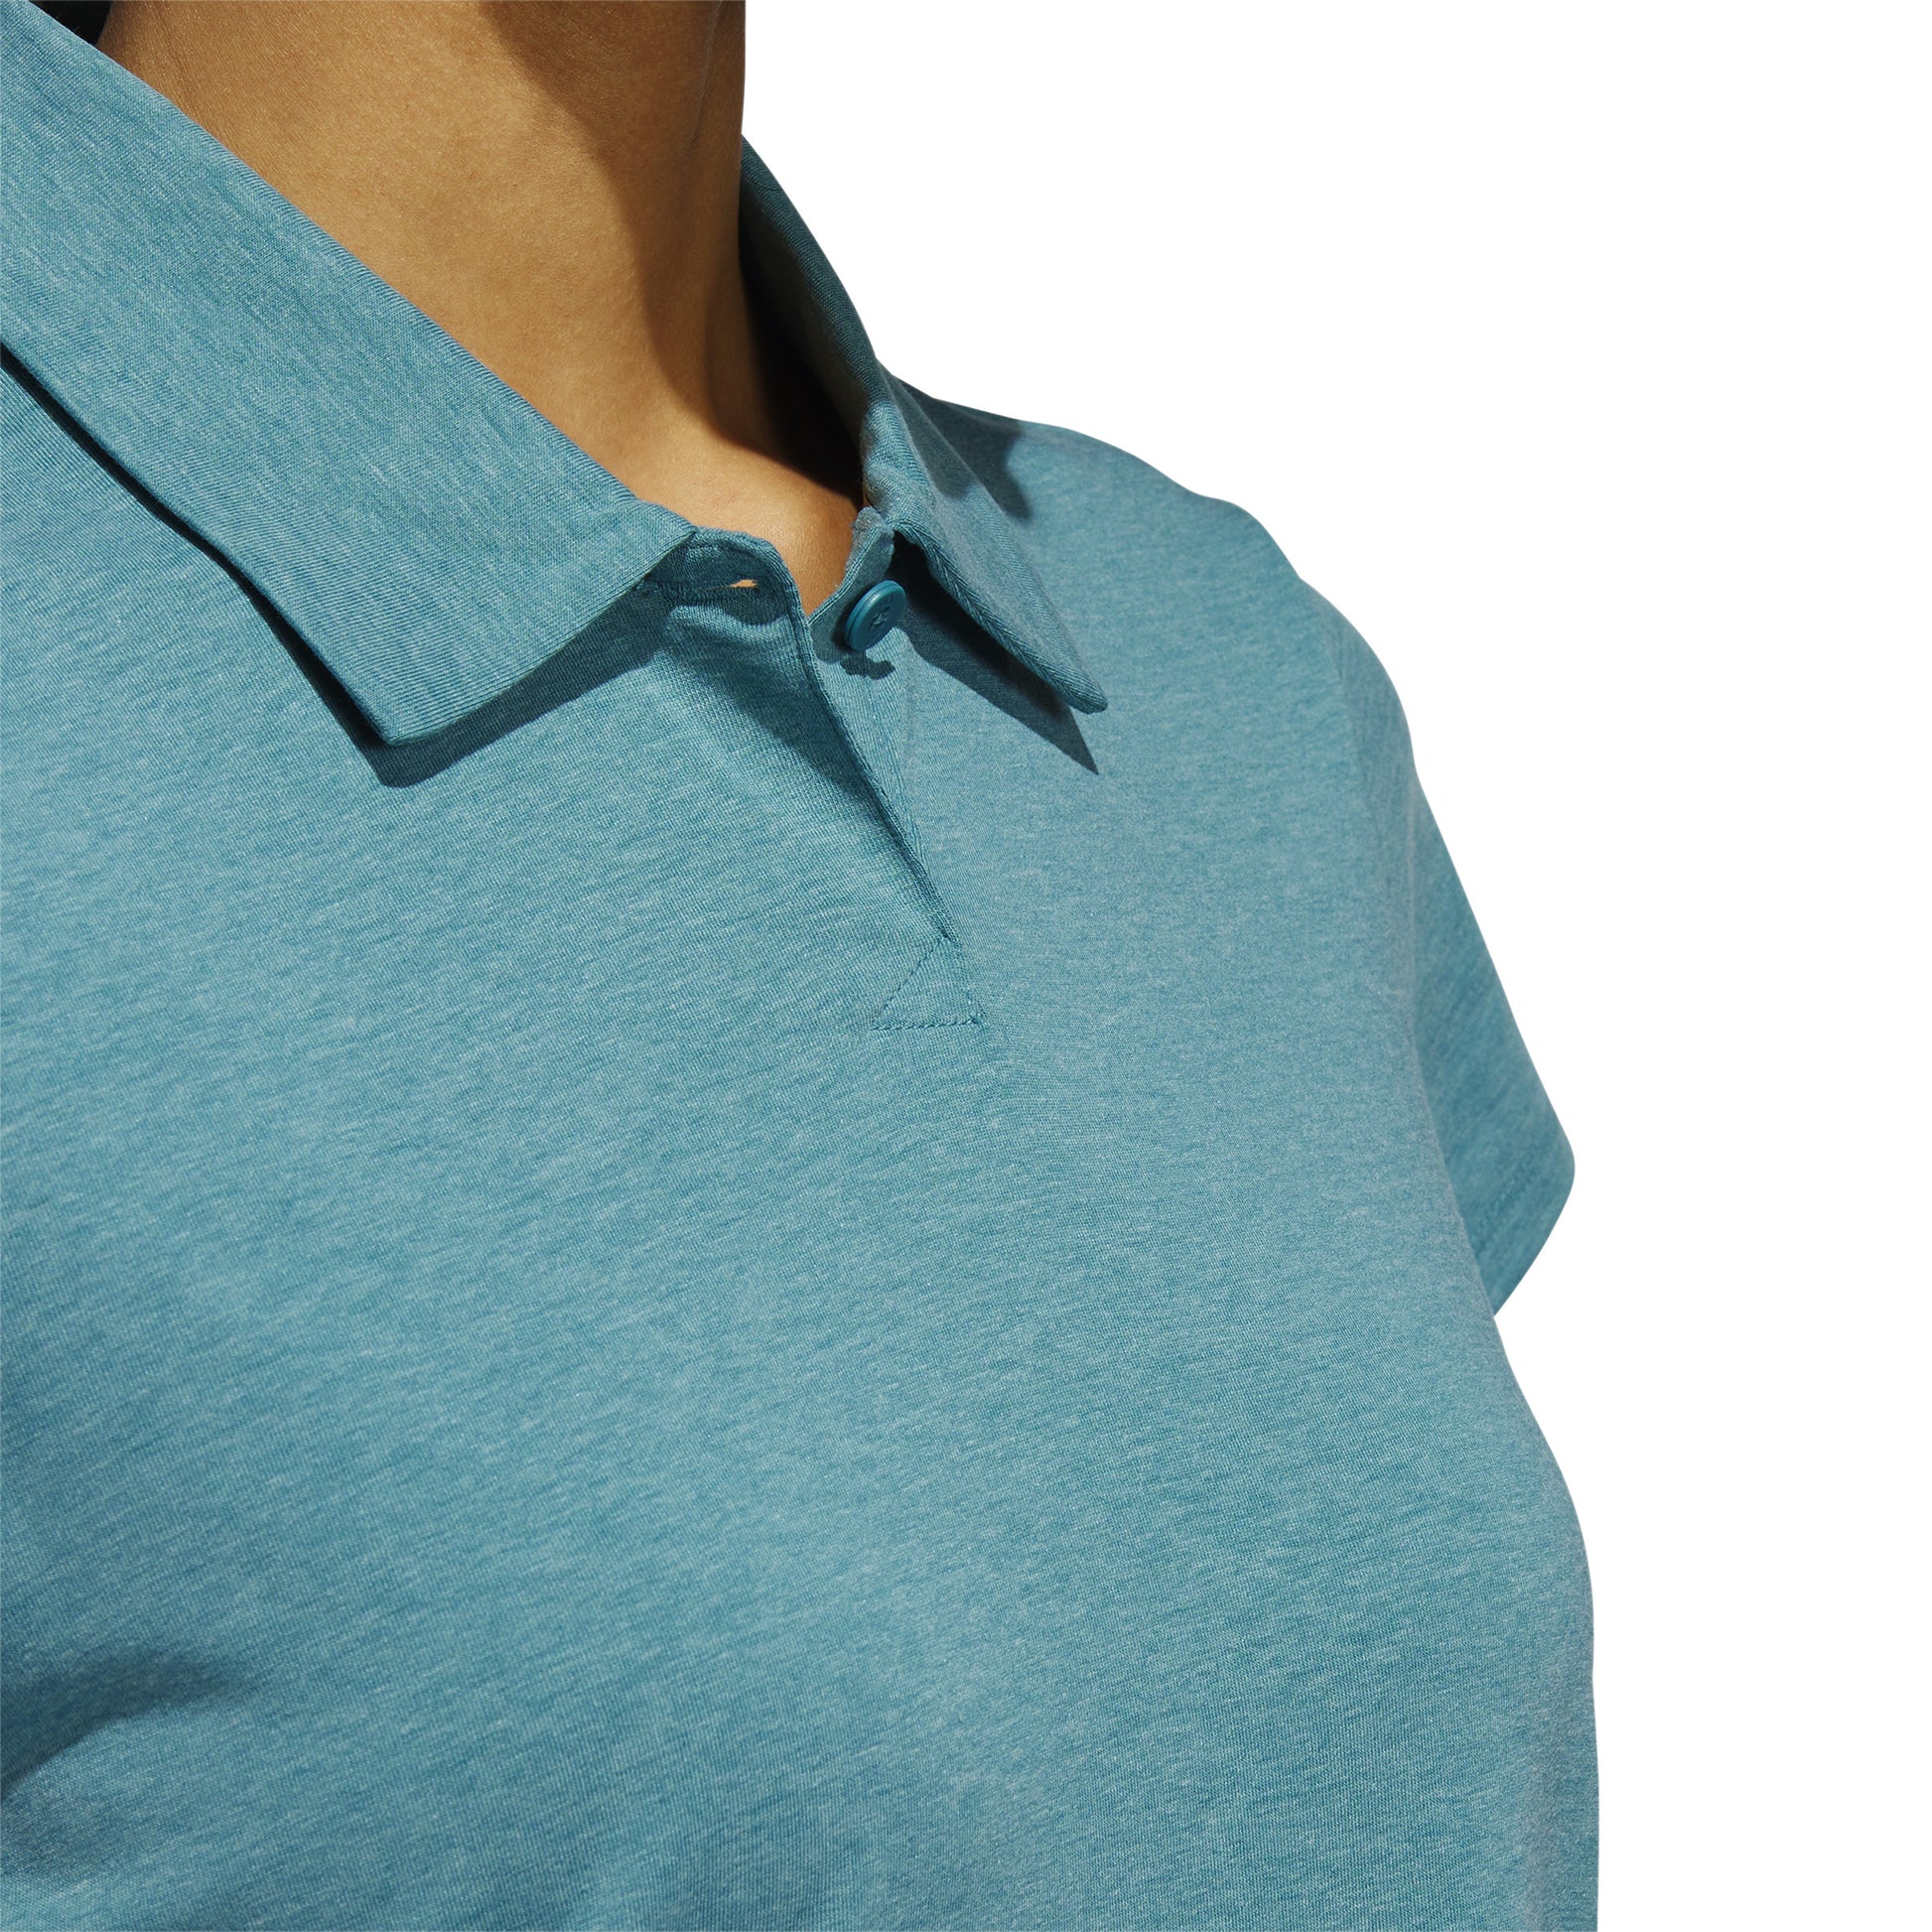 adidas Ladies Go-To Short Sleeve Golf Polo in Arctic Fusion